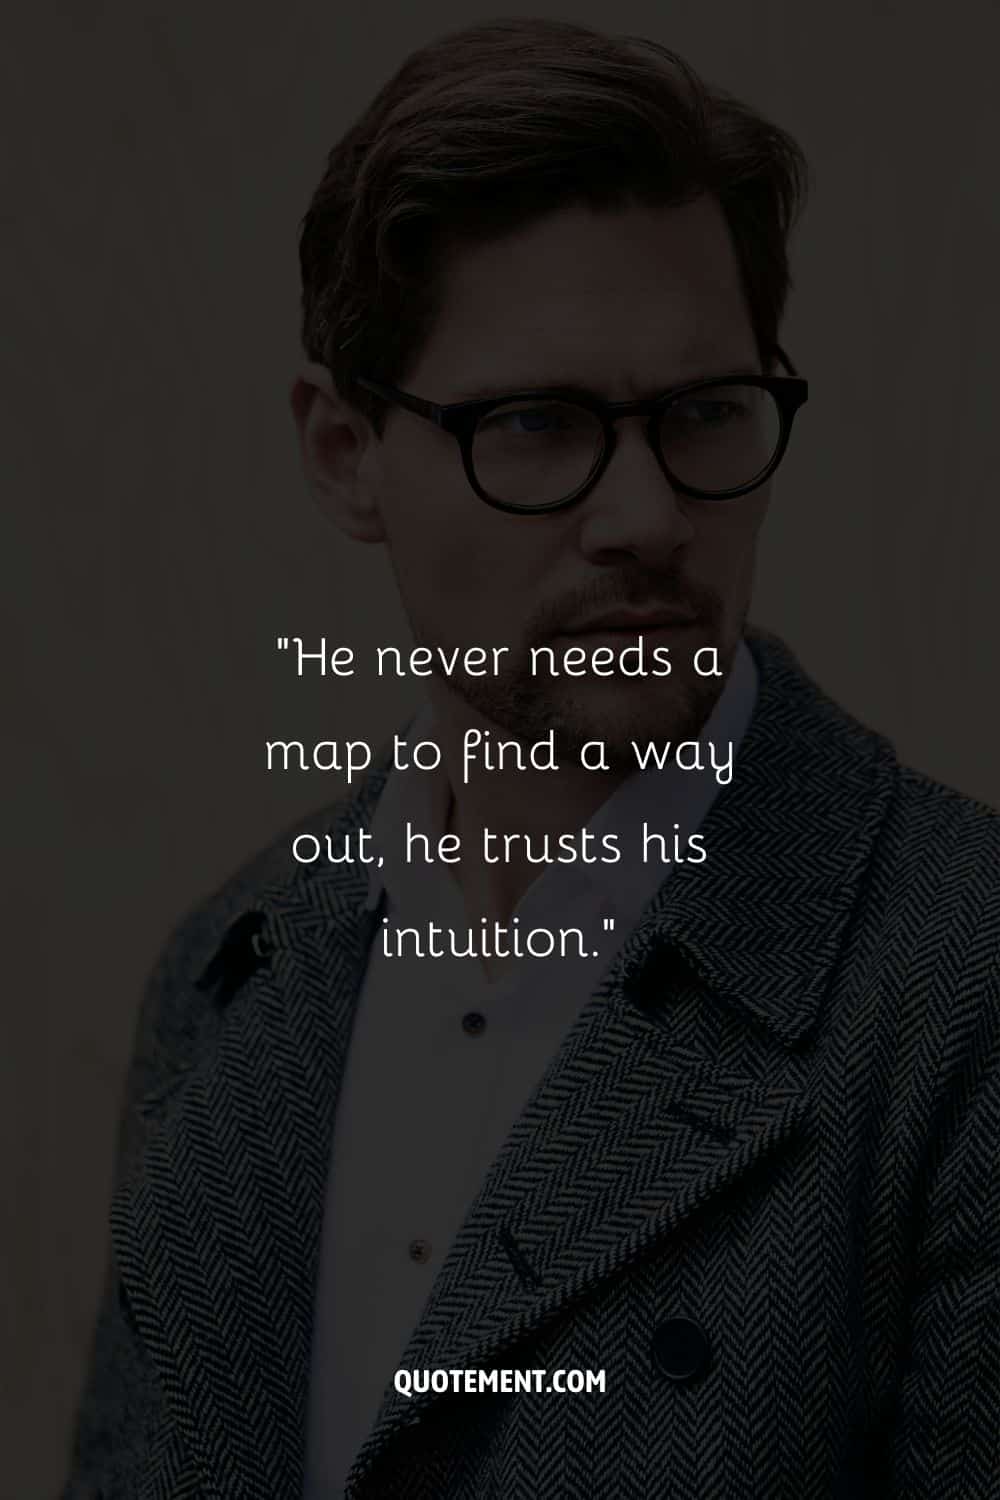 “He never needs a map to find a way out, he trusts his intuition.”